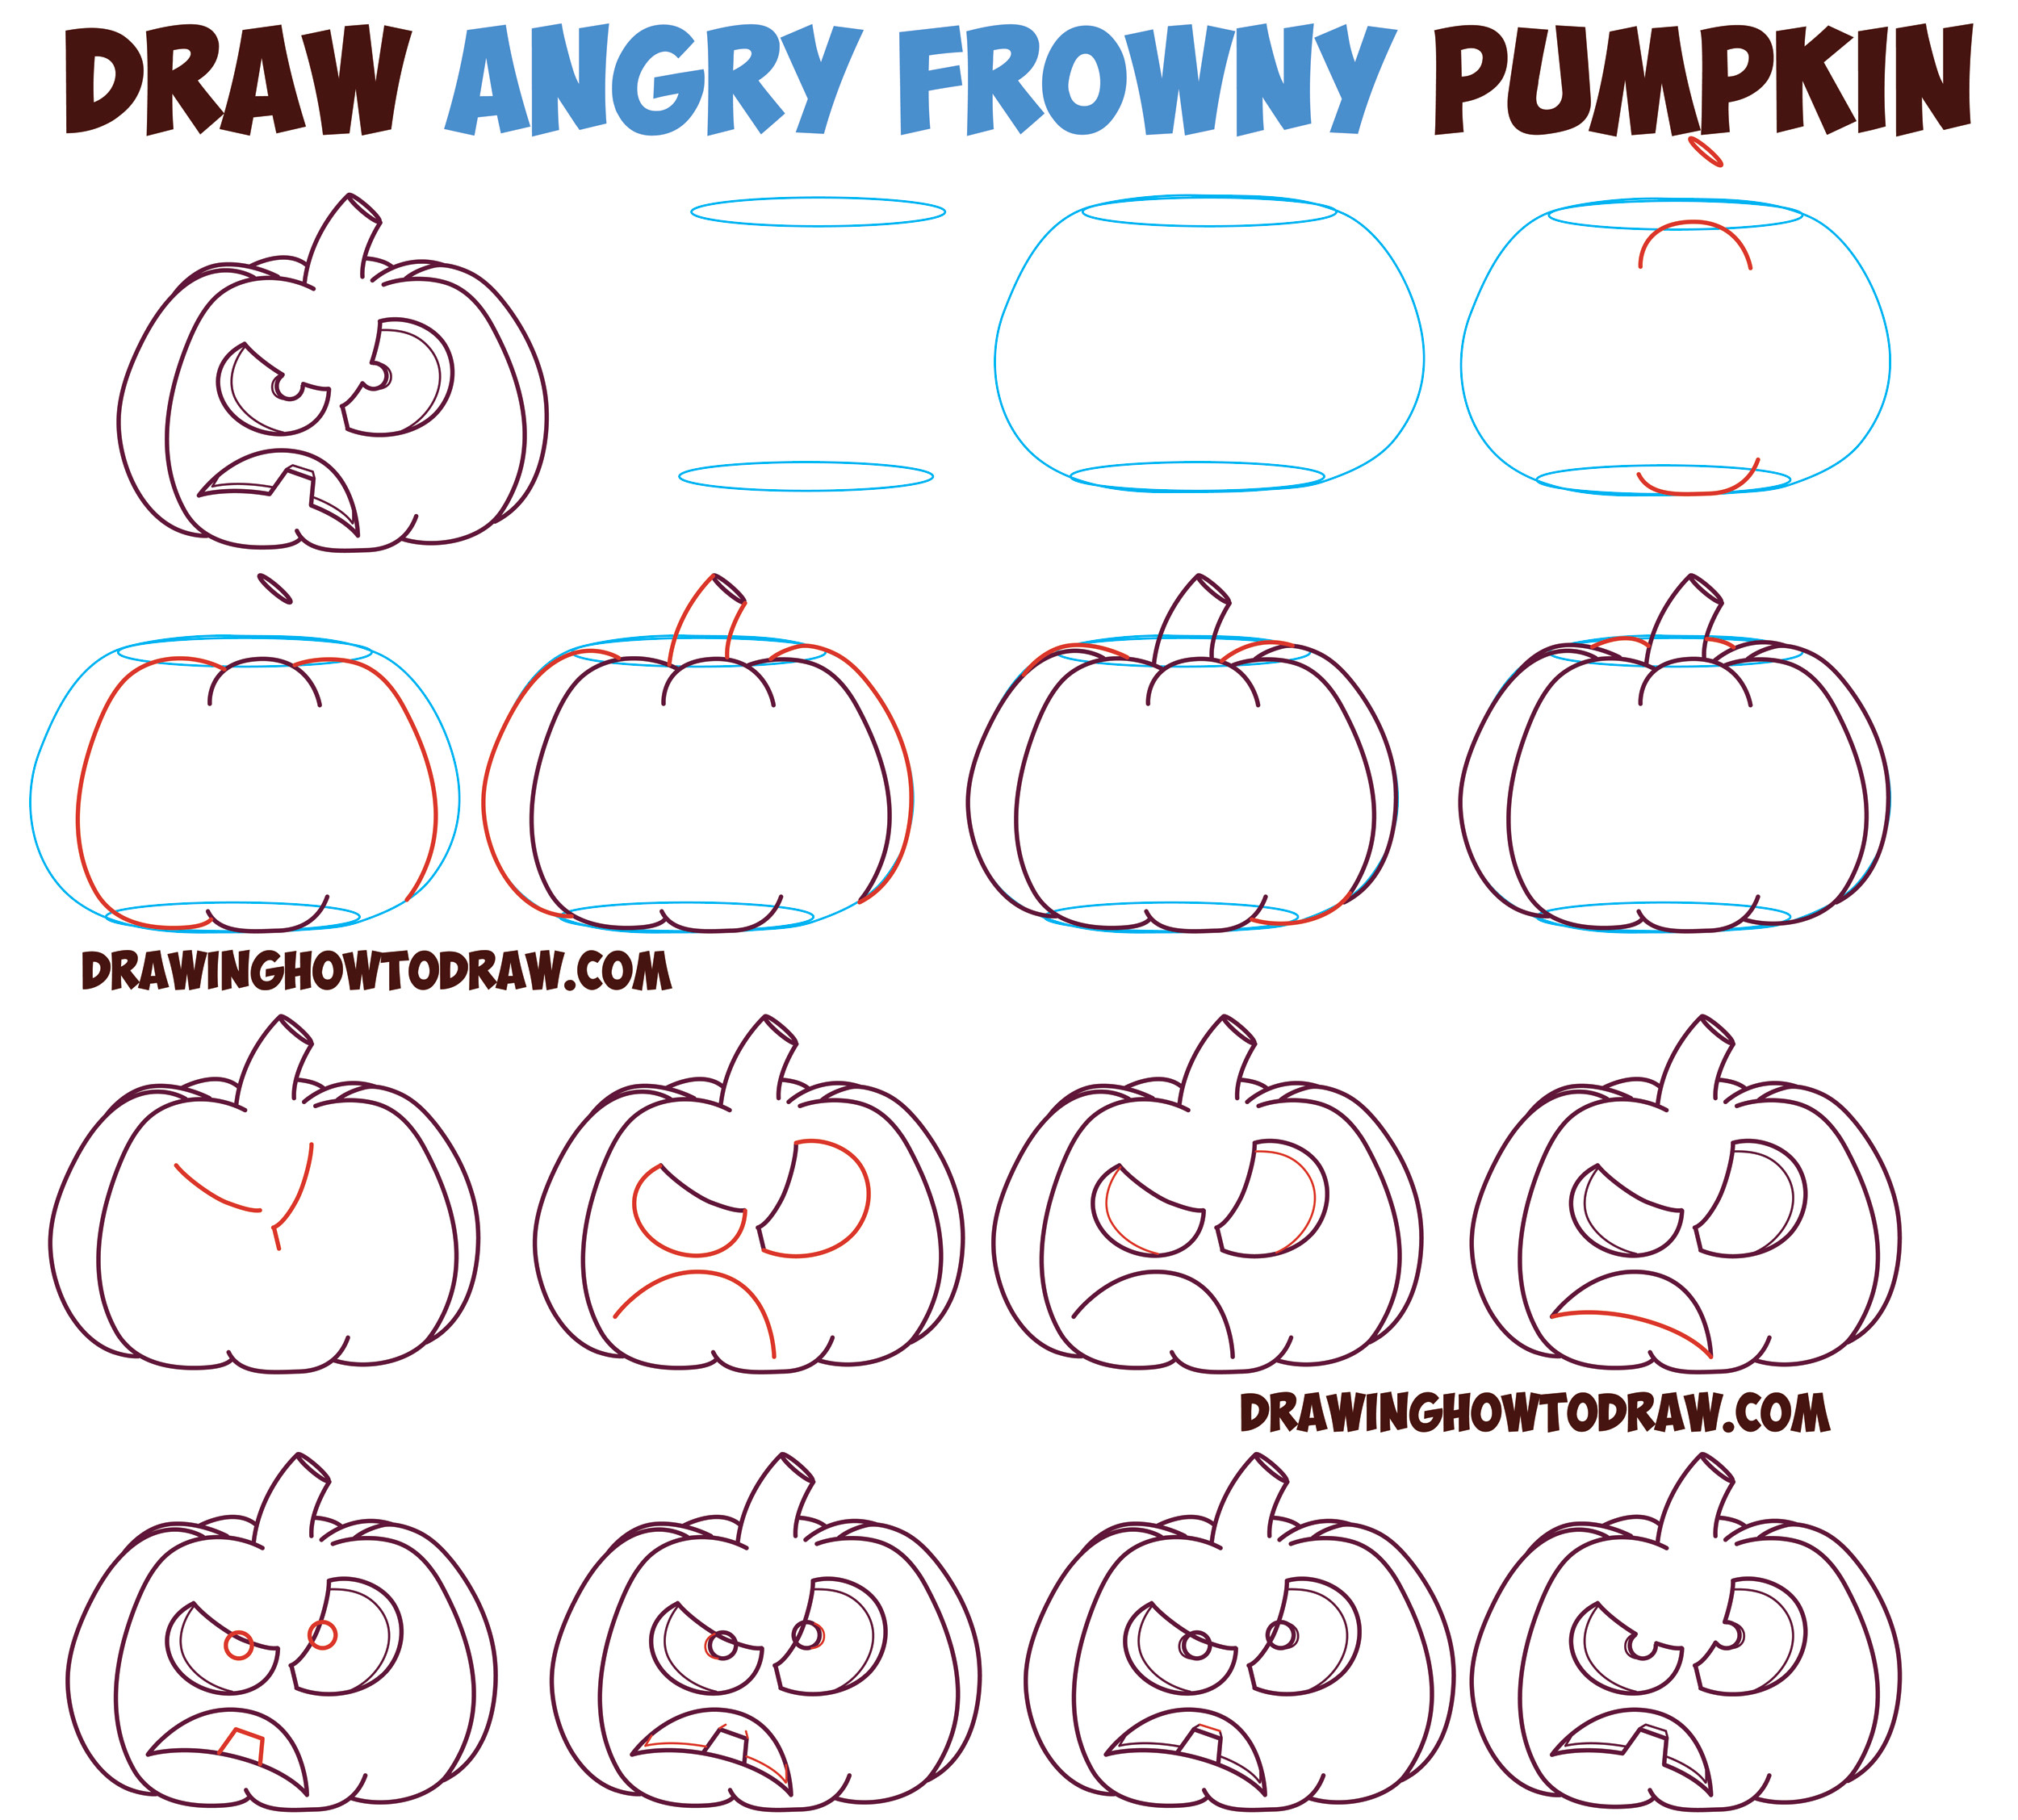 Jack O Lantern Drawing Easy Huge Guide to Drawing Cartoon Pumpkin Faces Jack O Lantern Faces